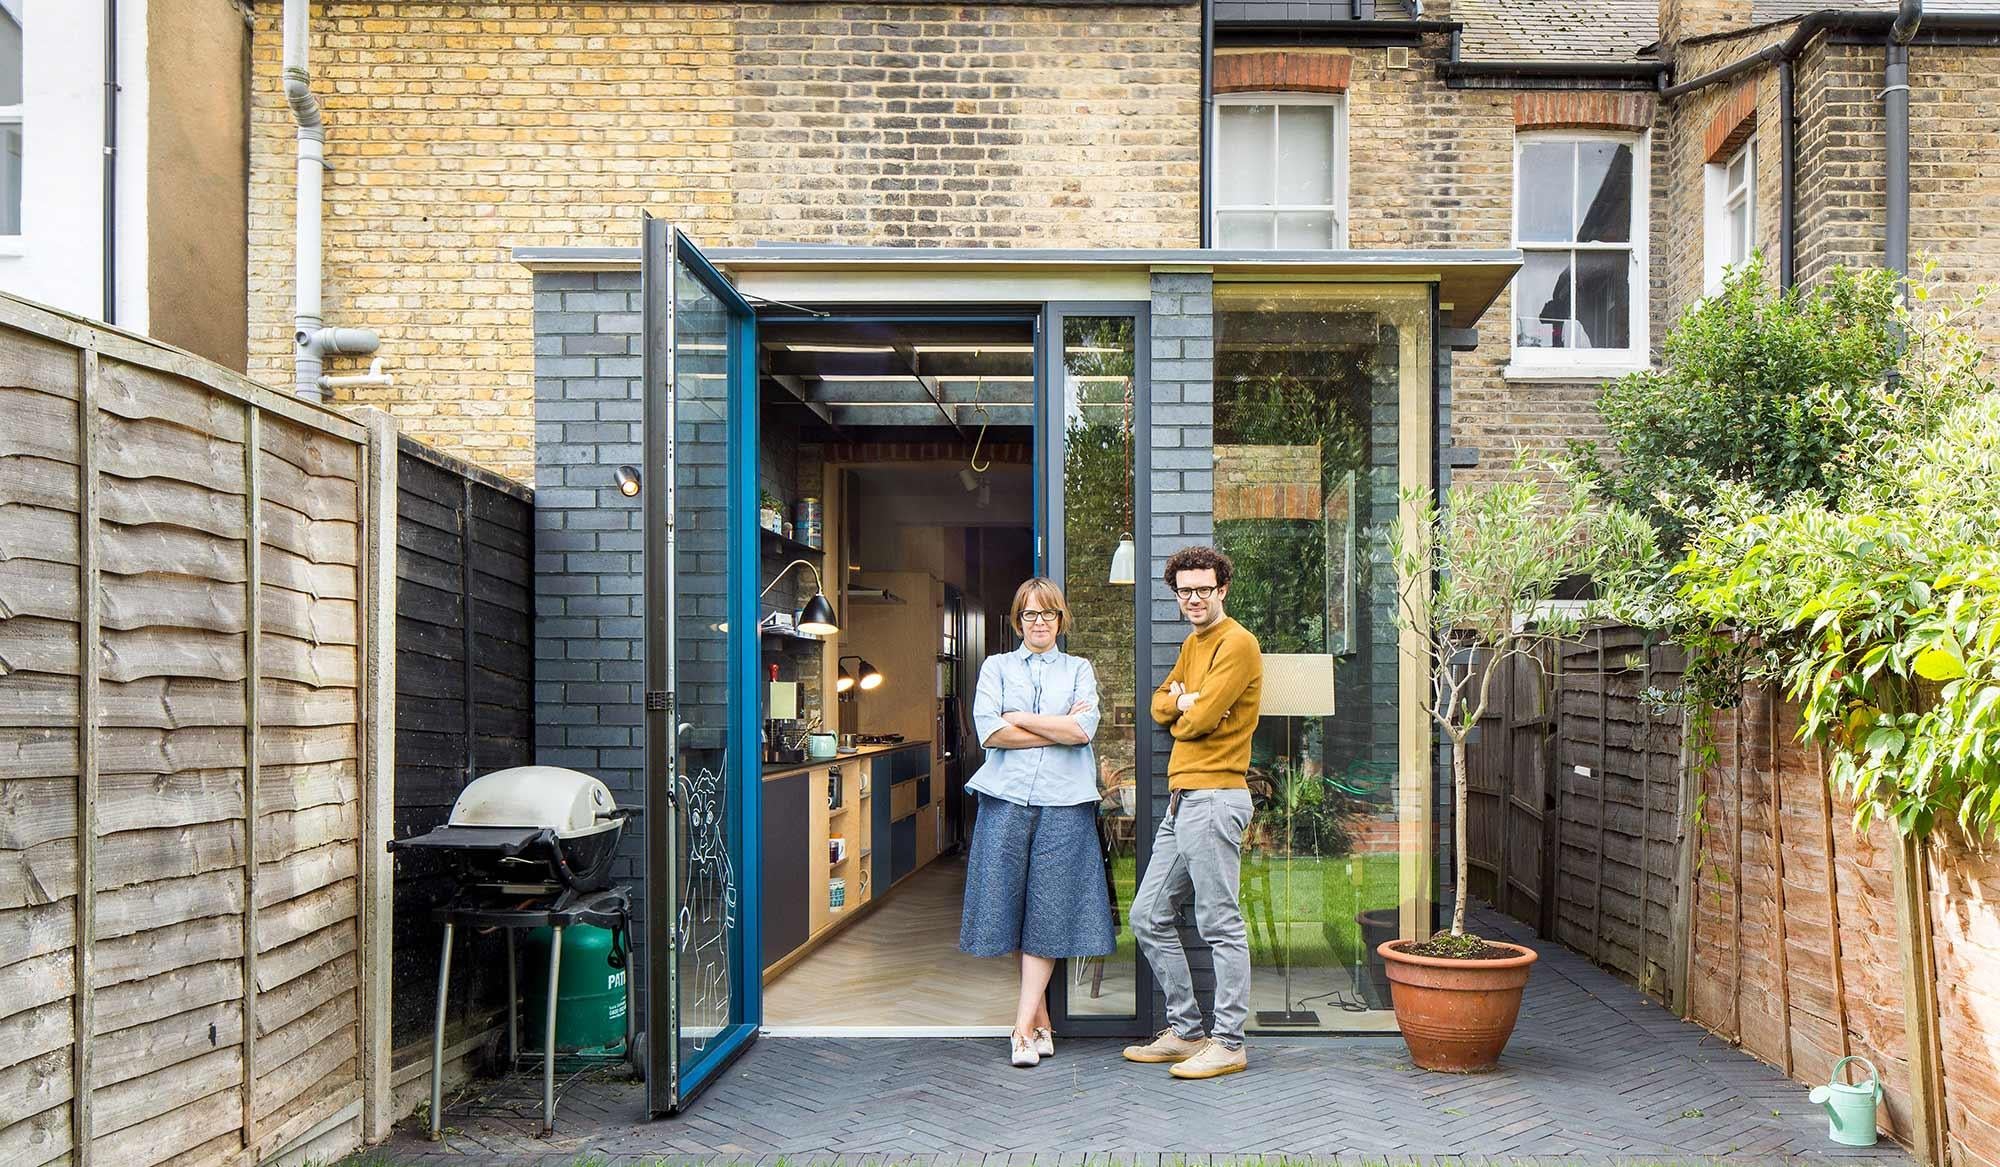 Adding just 72sq ft turned cramped Peckham terrace into a family home